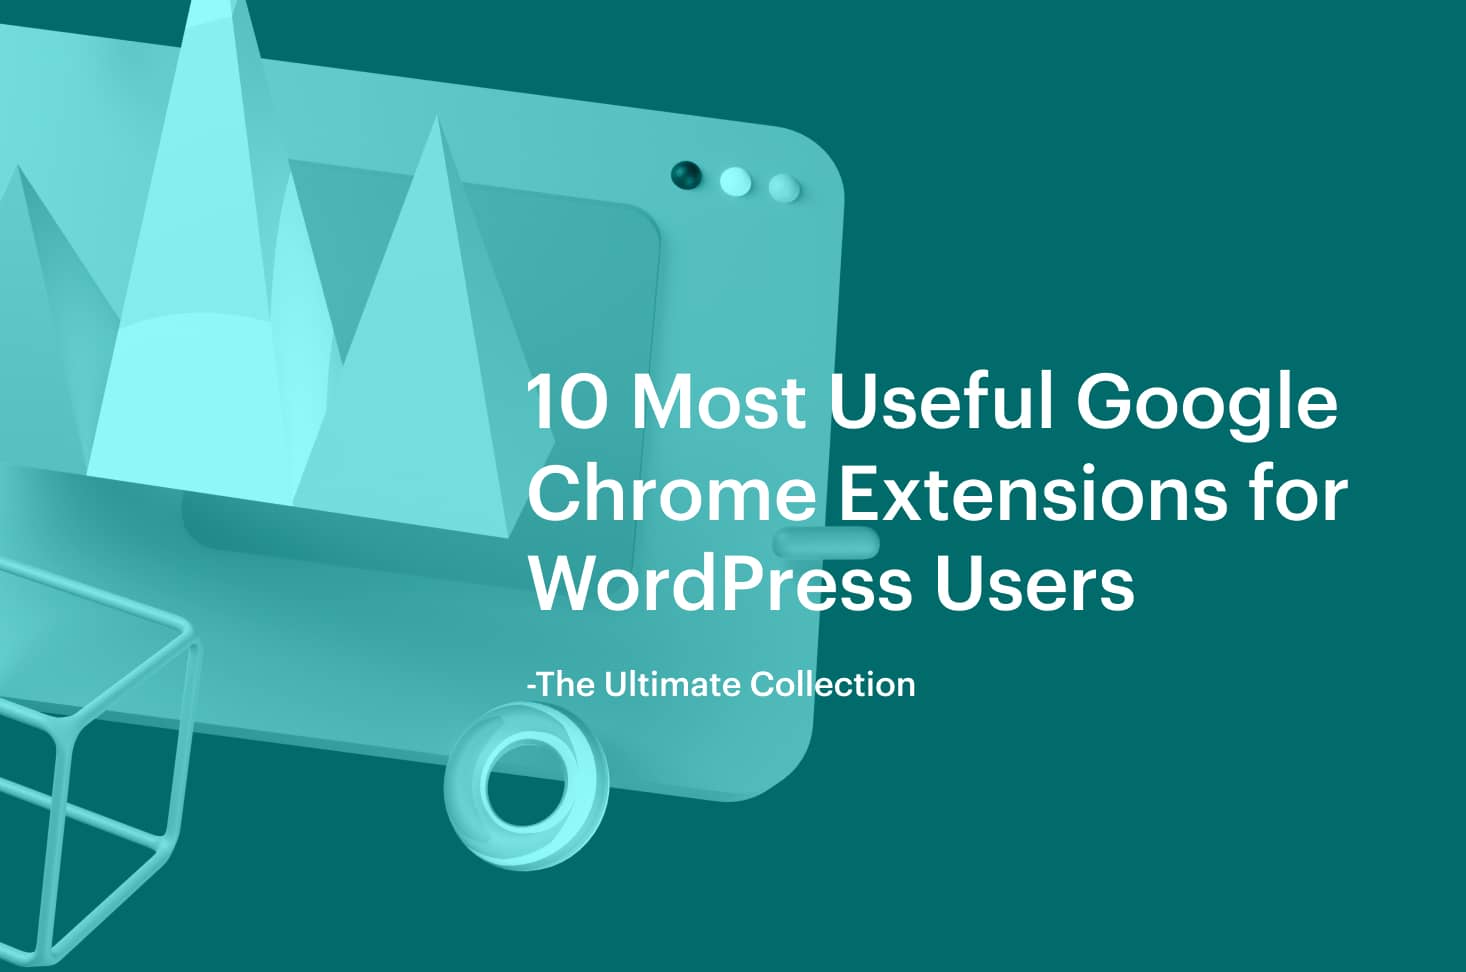 10 Most Useful Google Chrome Extensions for WordPress Users